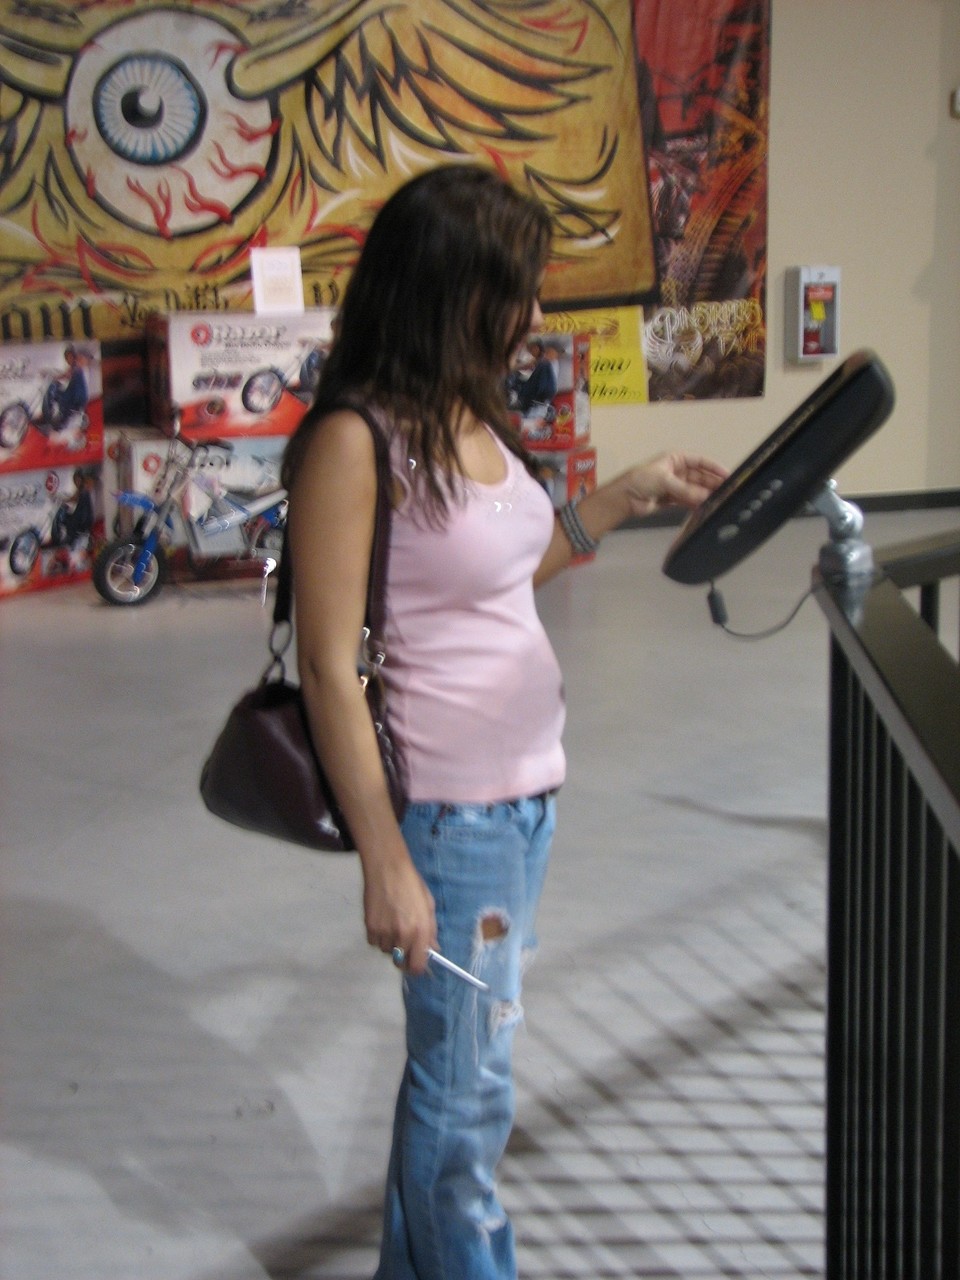 Amateur Katie in tight jeans flashes her big boobs with puffy nips in public foto porno #426861592 | Teen Girl Photos Pics, Amateur, porno móvil